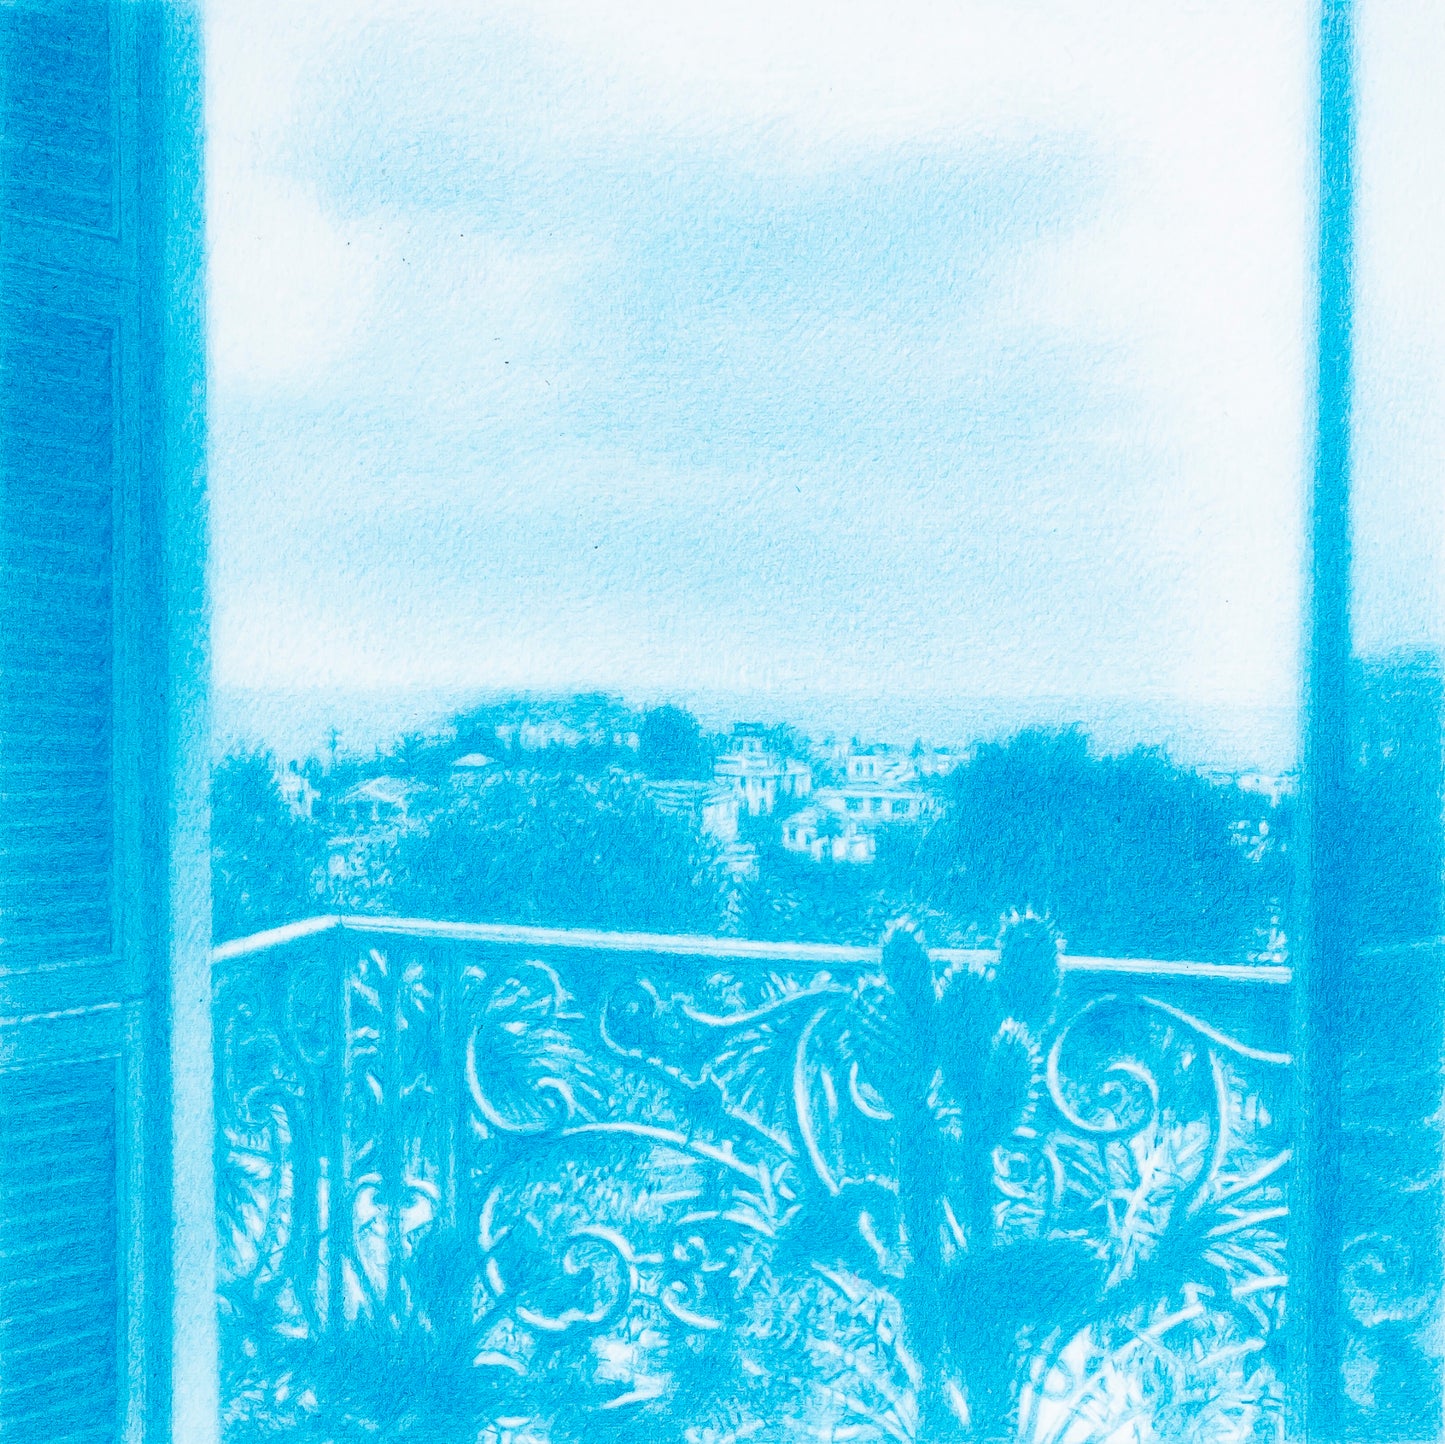 Matisse's view in turquoise (Nice), 2020